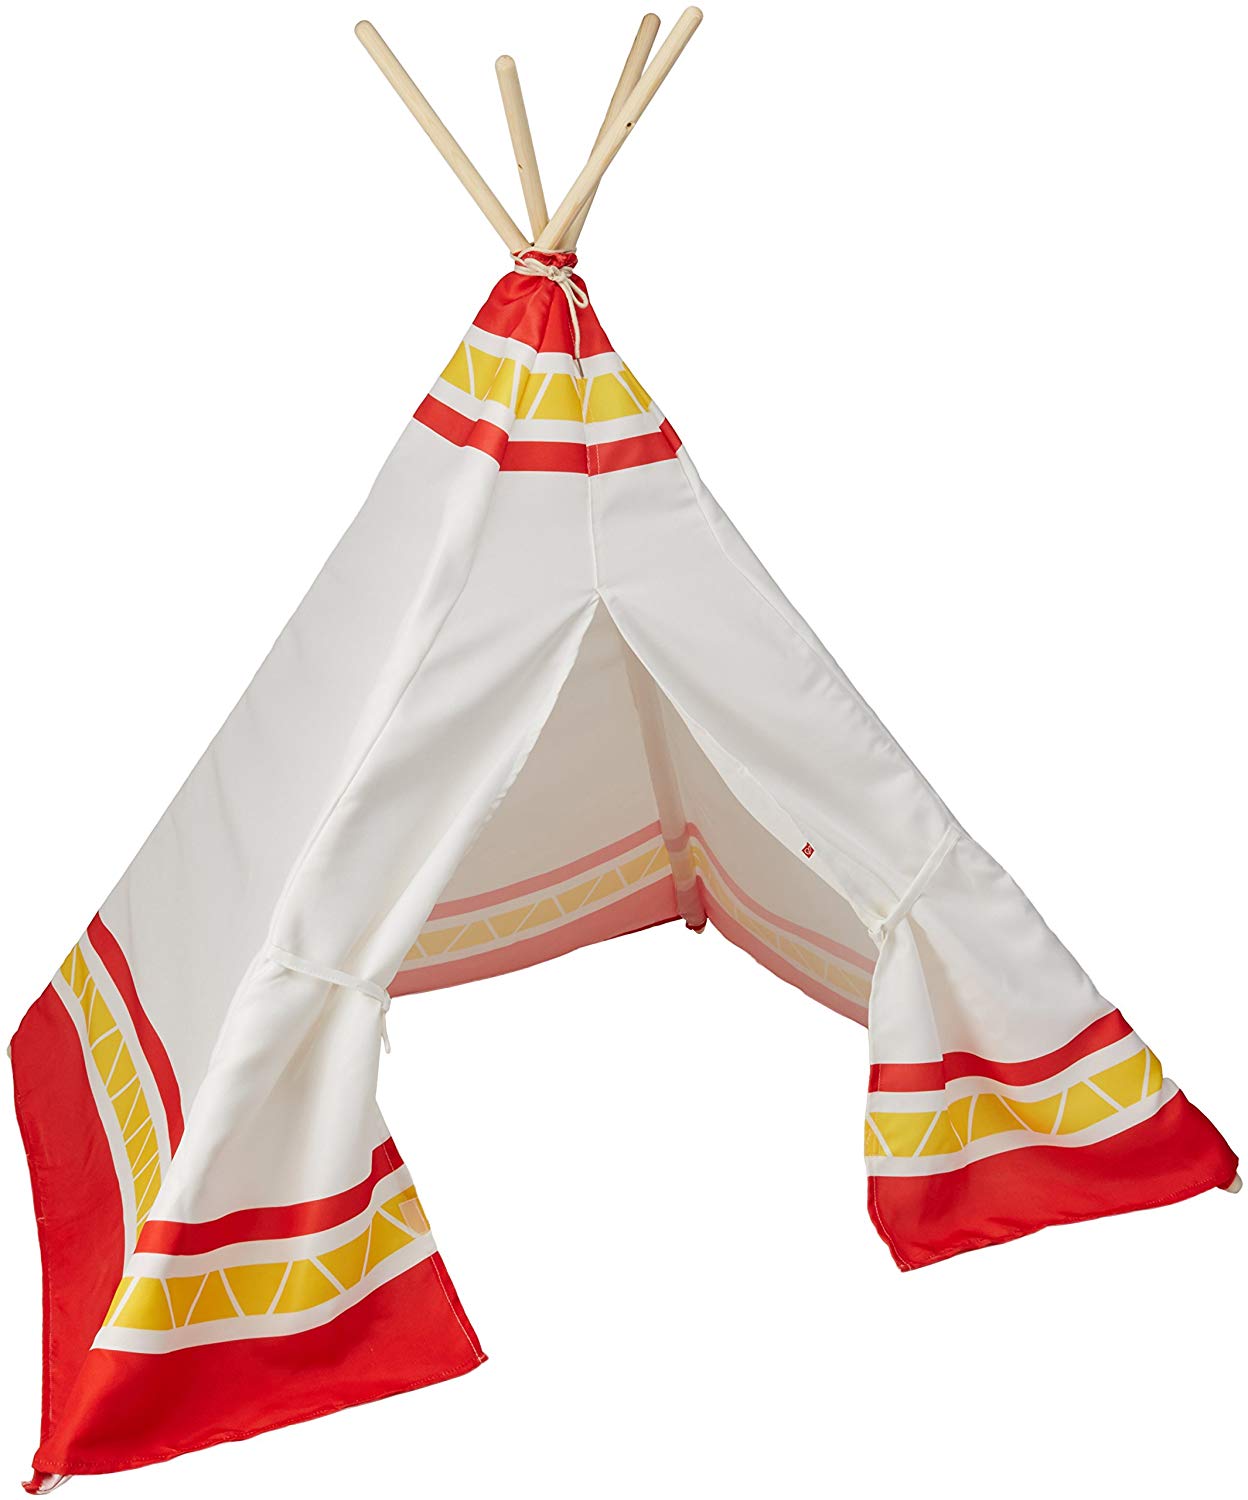 Teepee Tent-Red